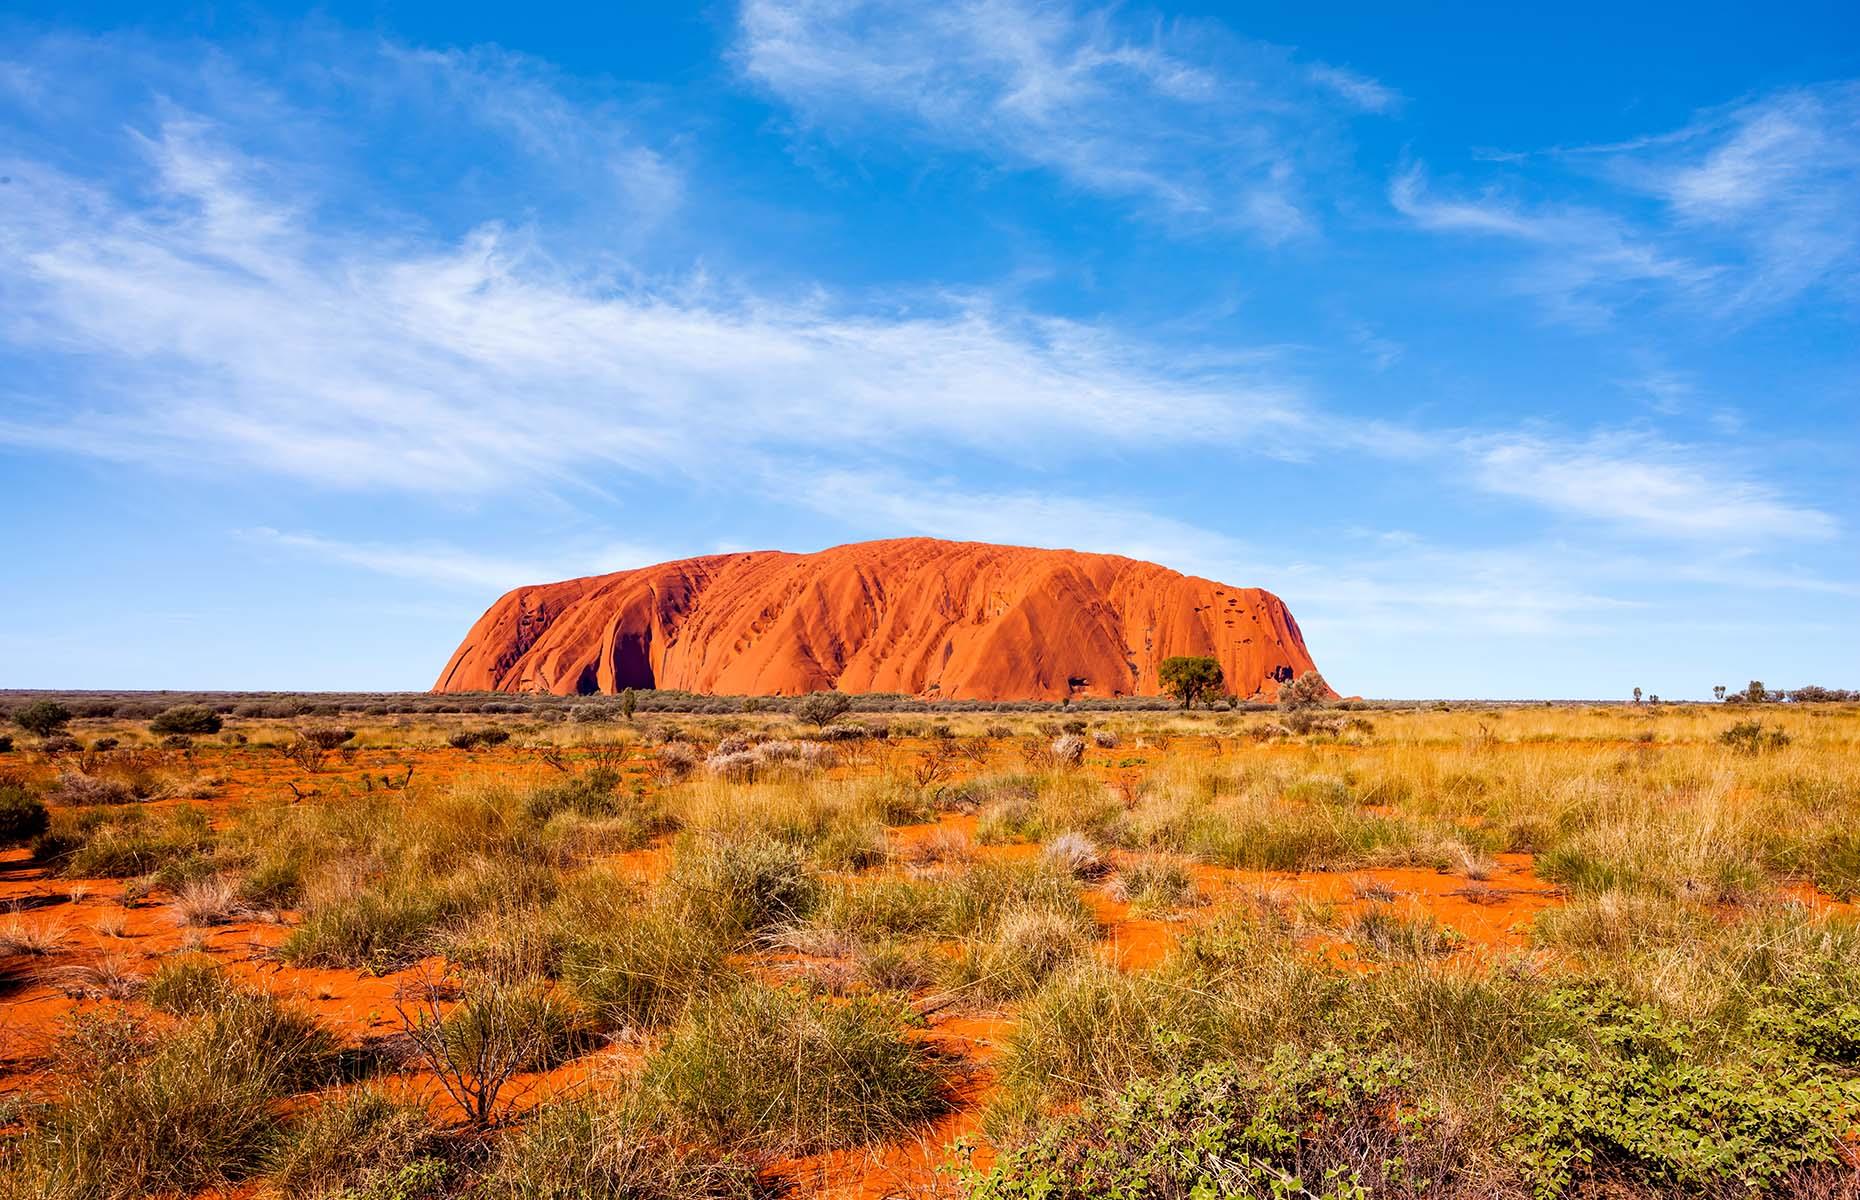 The imposing beauty and spiritual significance of this mammoth monolith, which thrusts out of the red dirt in the desolate centre of Australia, is unnerving. Surrounded by the Red Centre's untamed wilderness as far as the eye can see, there's something truly primeval about the ancient sandstone boulder. It's a hugely sacred site for the Anangu people – the custodians of the land – and one of the greatest natural wonders of the world.